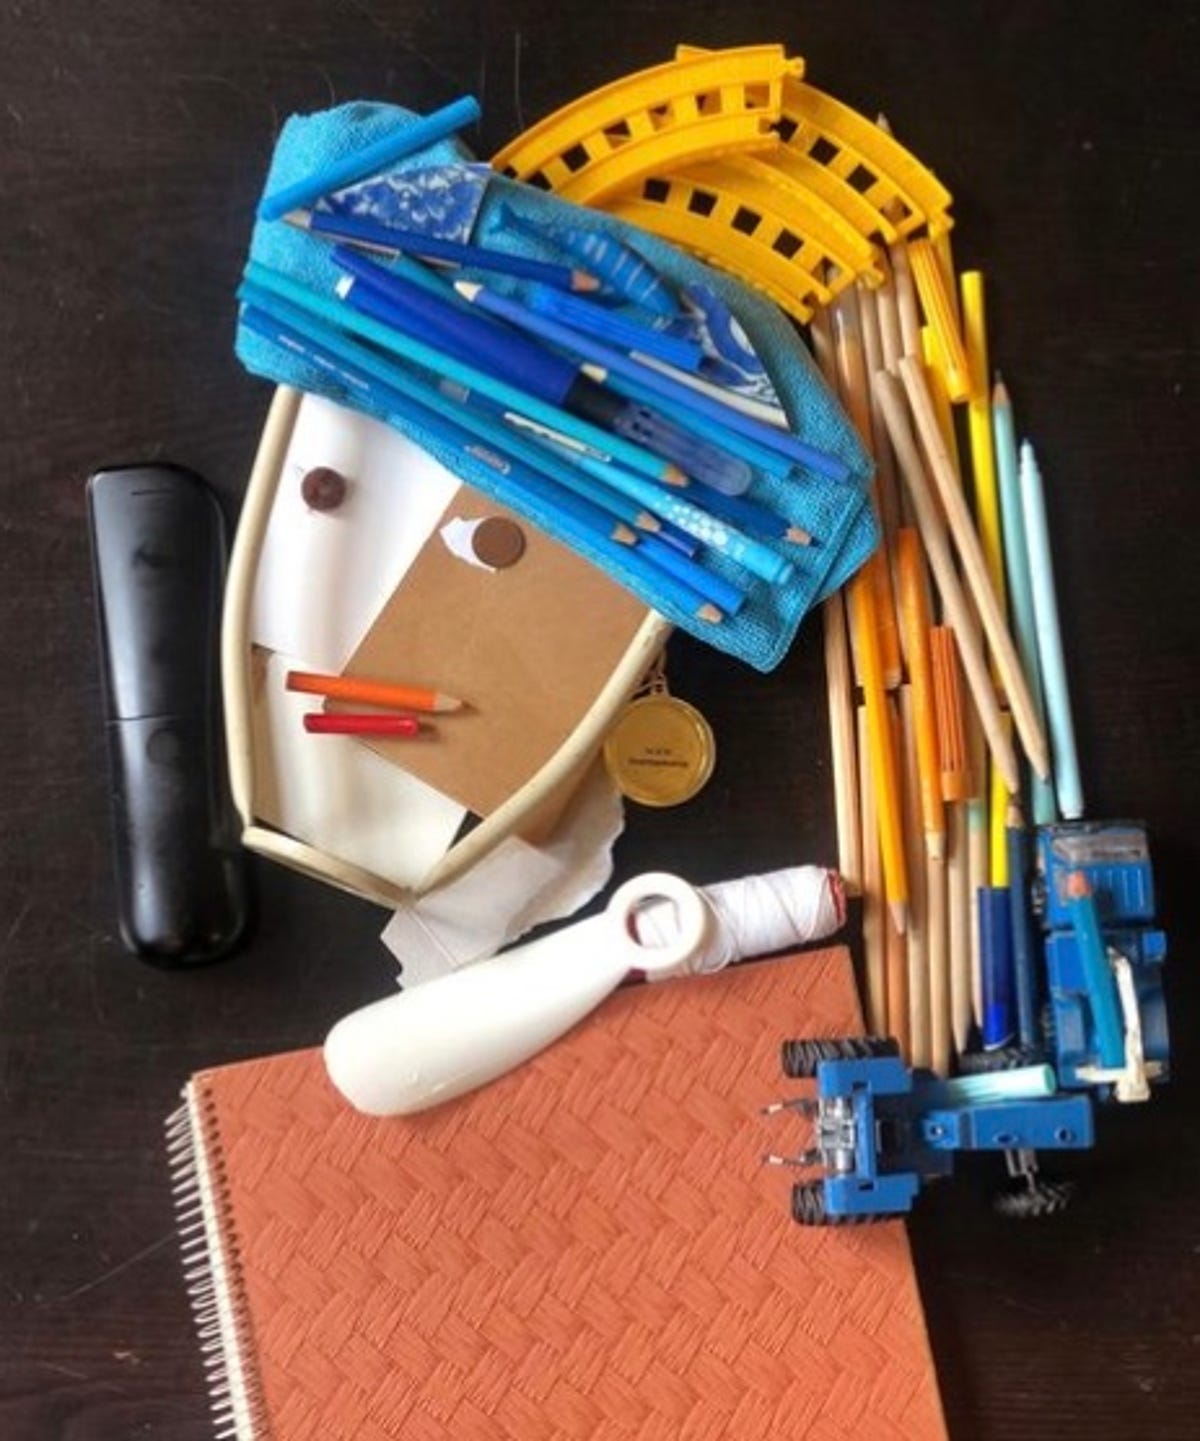 Pencils and other school supplies in the shape of girl with pearl earring